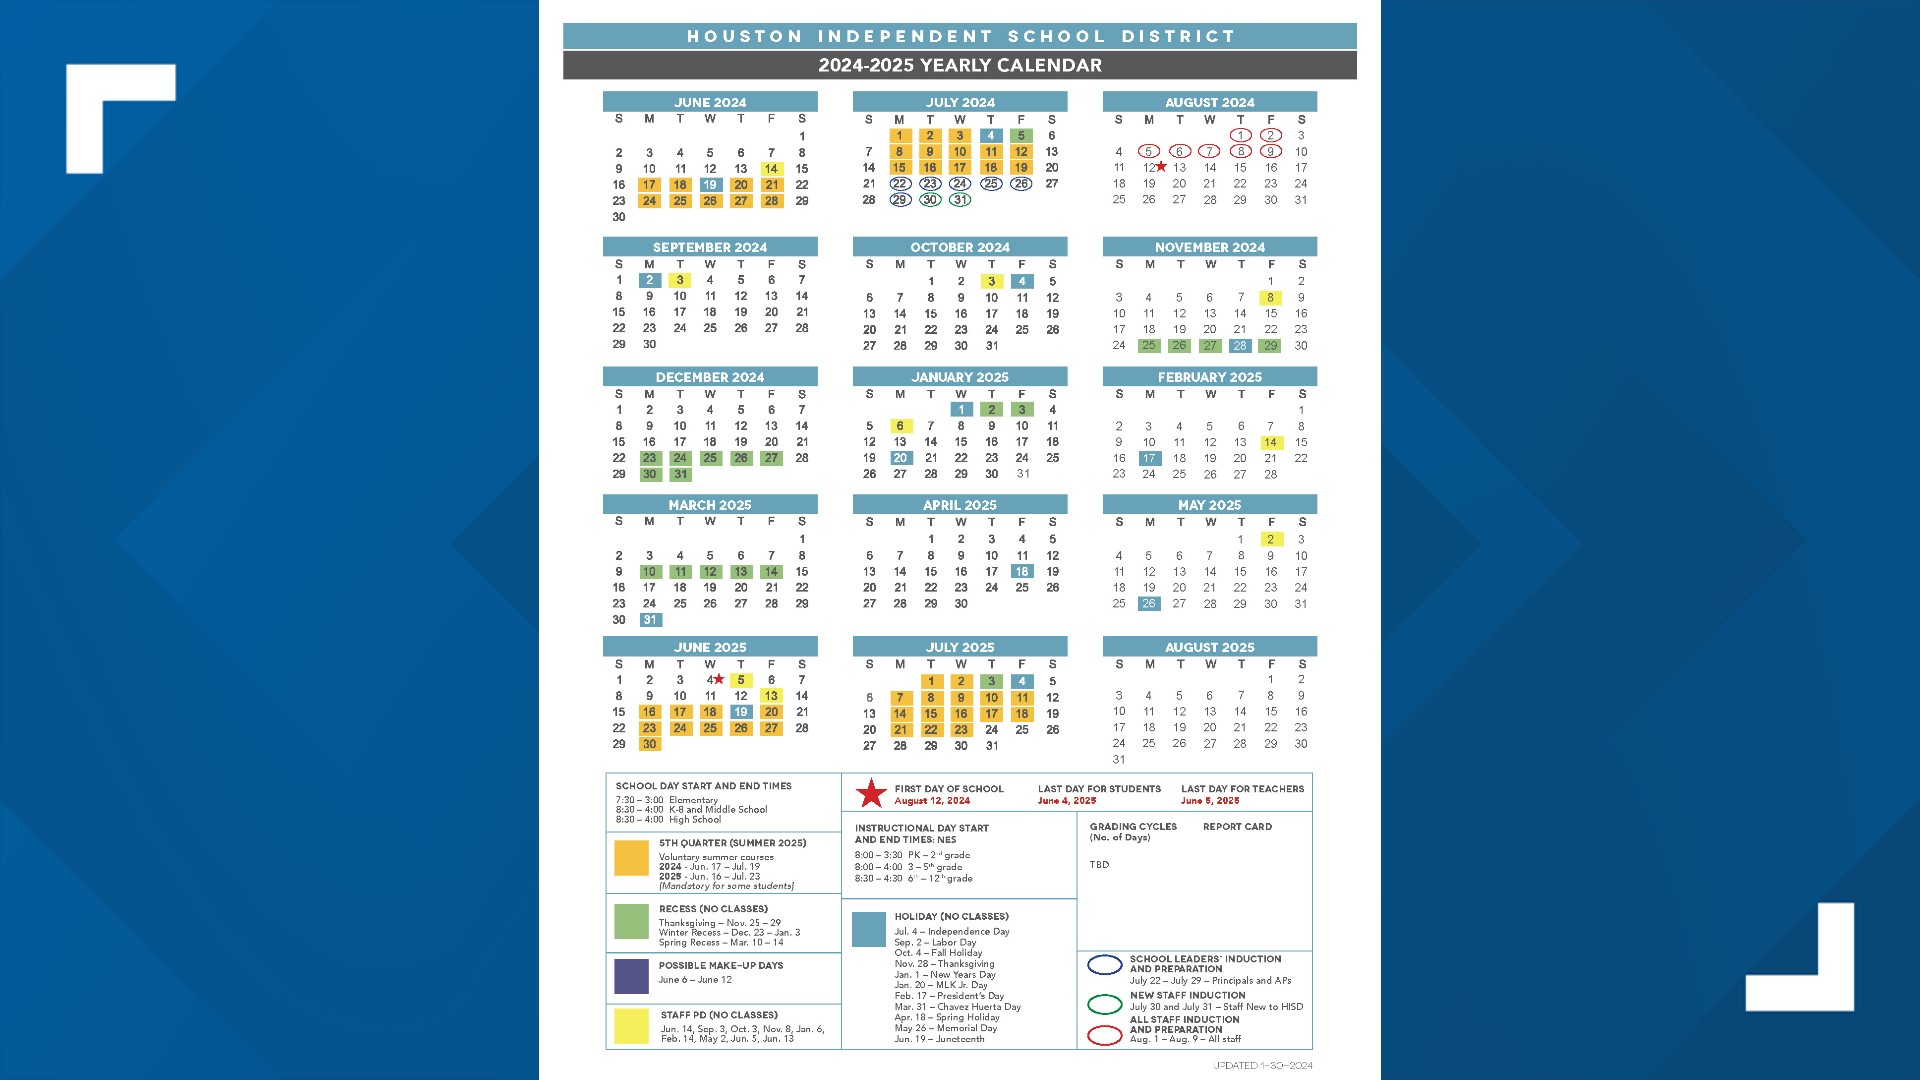 HISD releases proposed 20242025 school year calendar